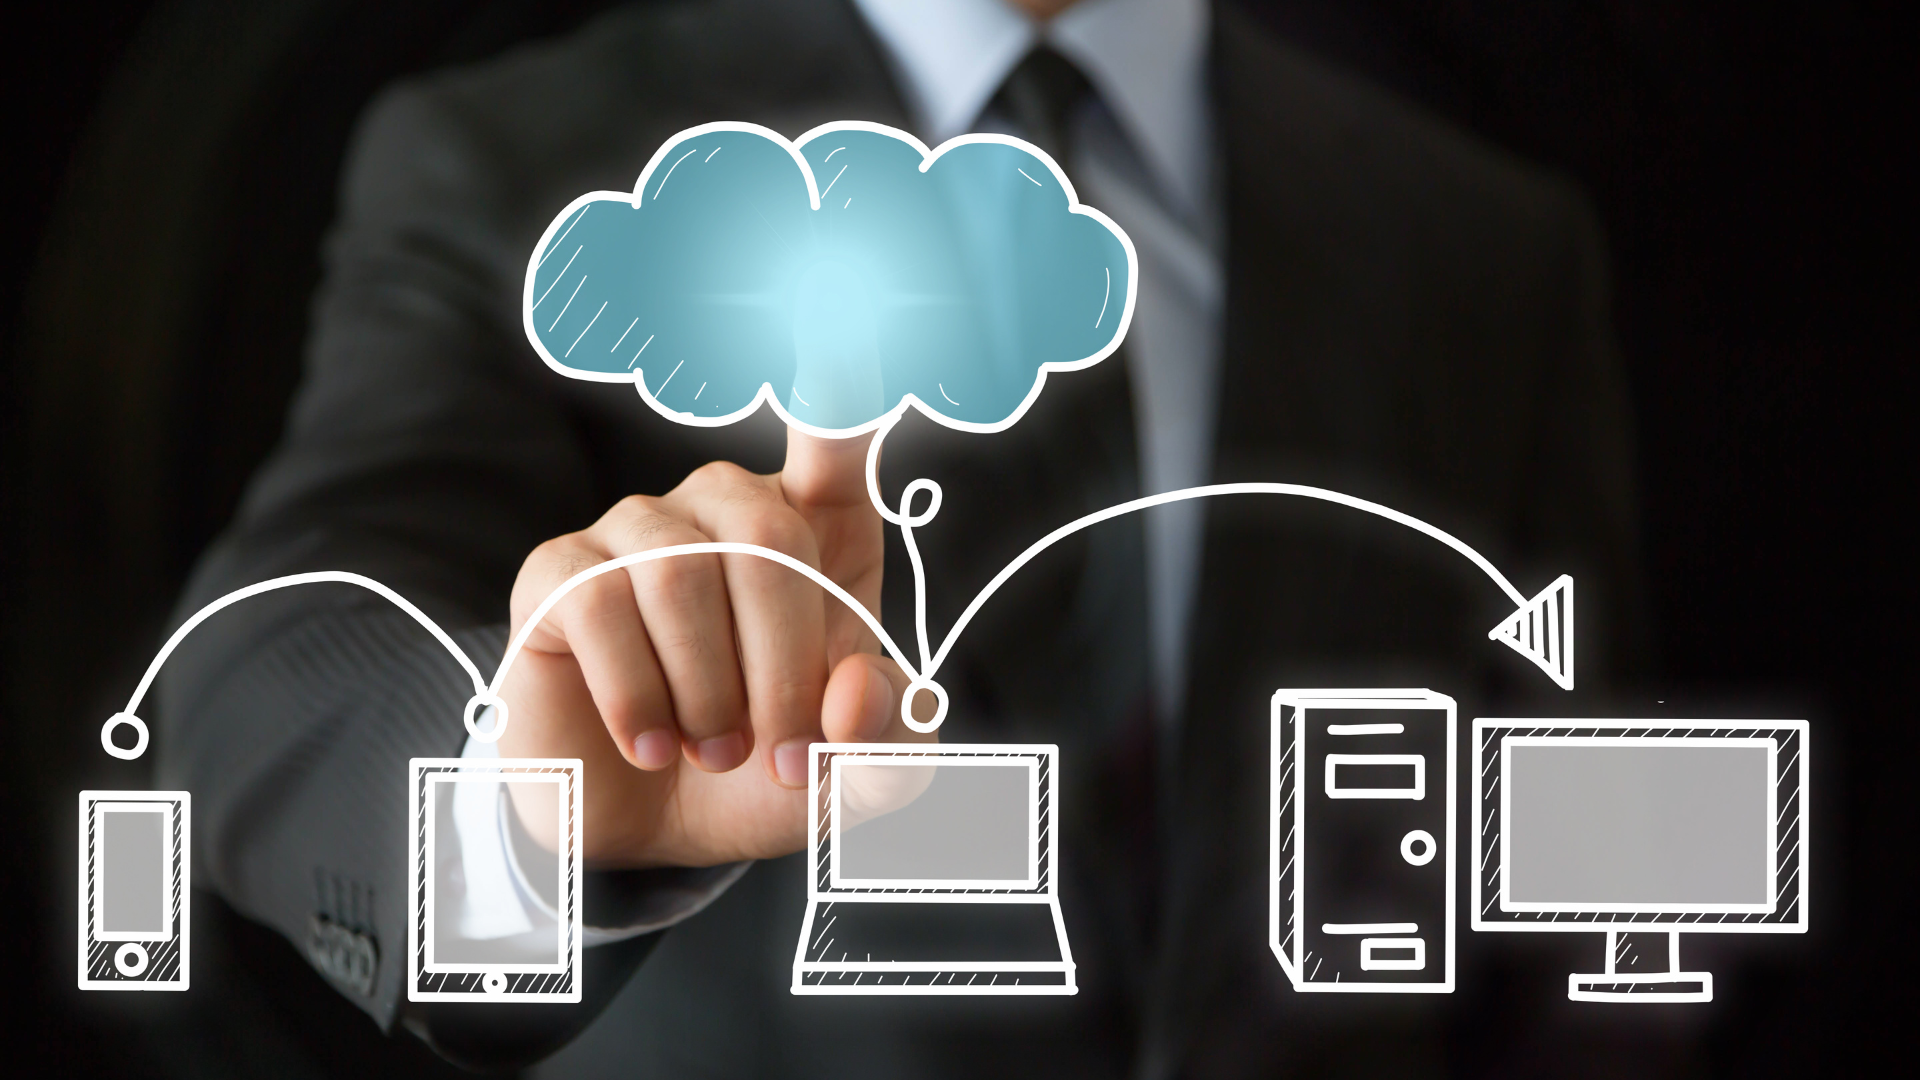 A business professional is pointing at a cloud surrounded by computer icons, symbolizing their choice to switch to a cloud-based phone system.